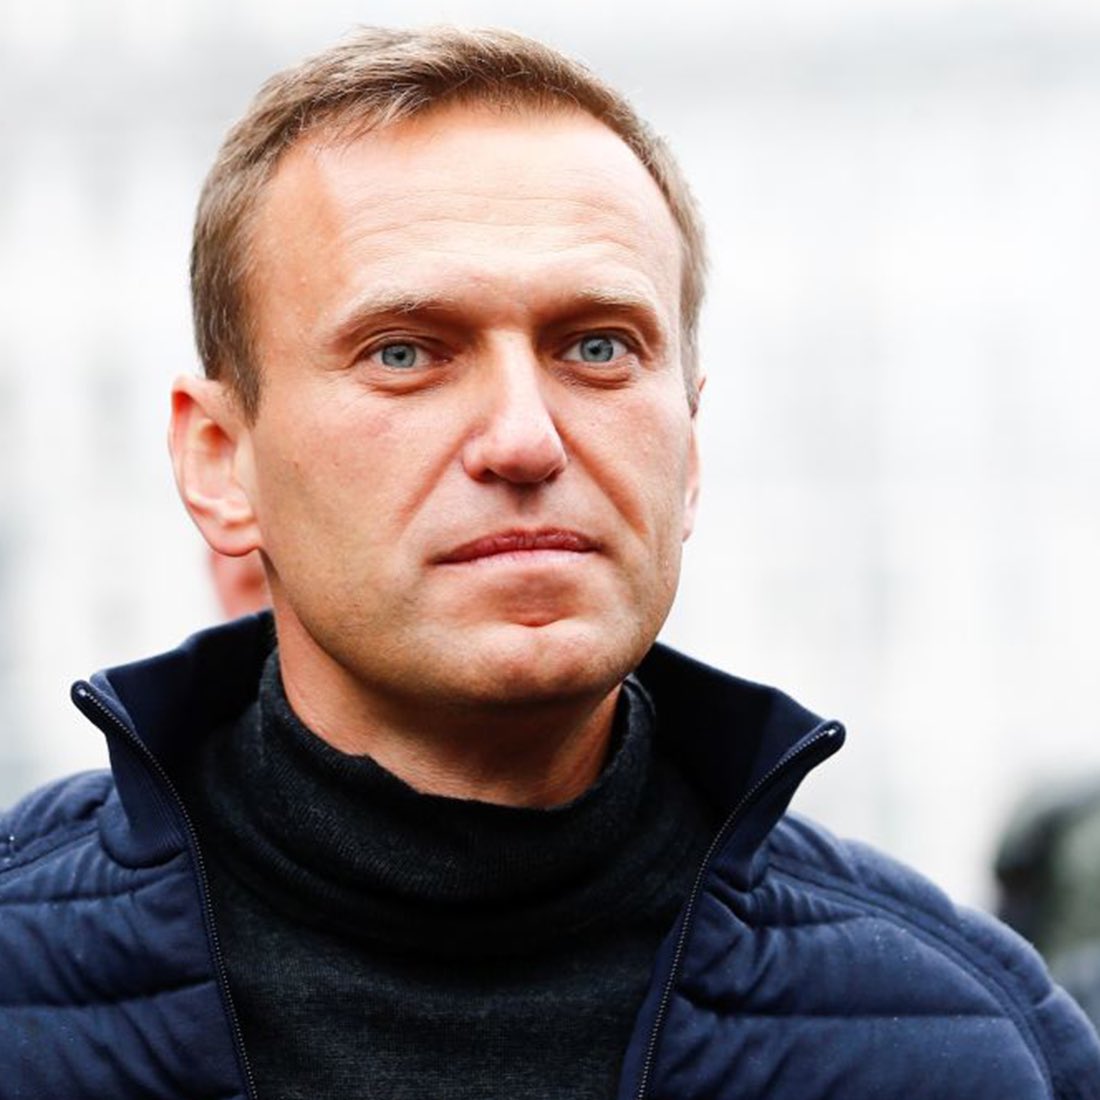 Deeply disturbed and saddened by news of the death of Alexei Navalny. Putin fears nothing more than dissent from his own people. A grim reminder of what Putin and his regime are all about. Let's unite in our fight to safeguard the freedom and safety of those who dare to